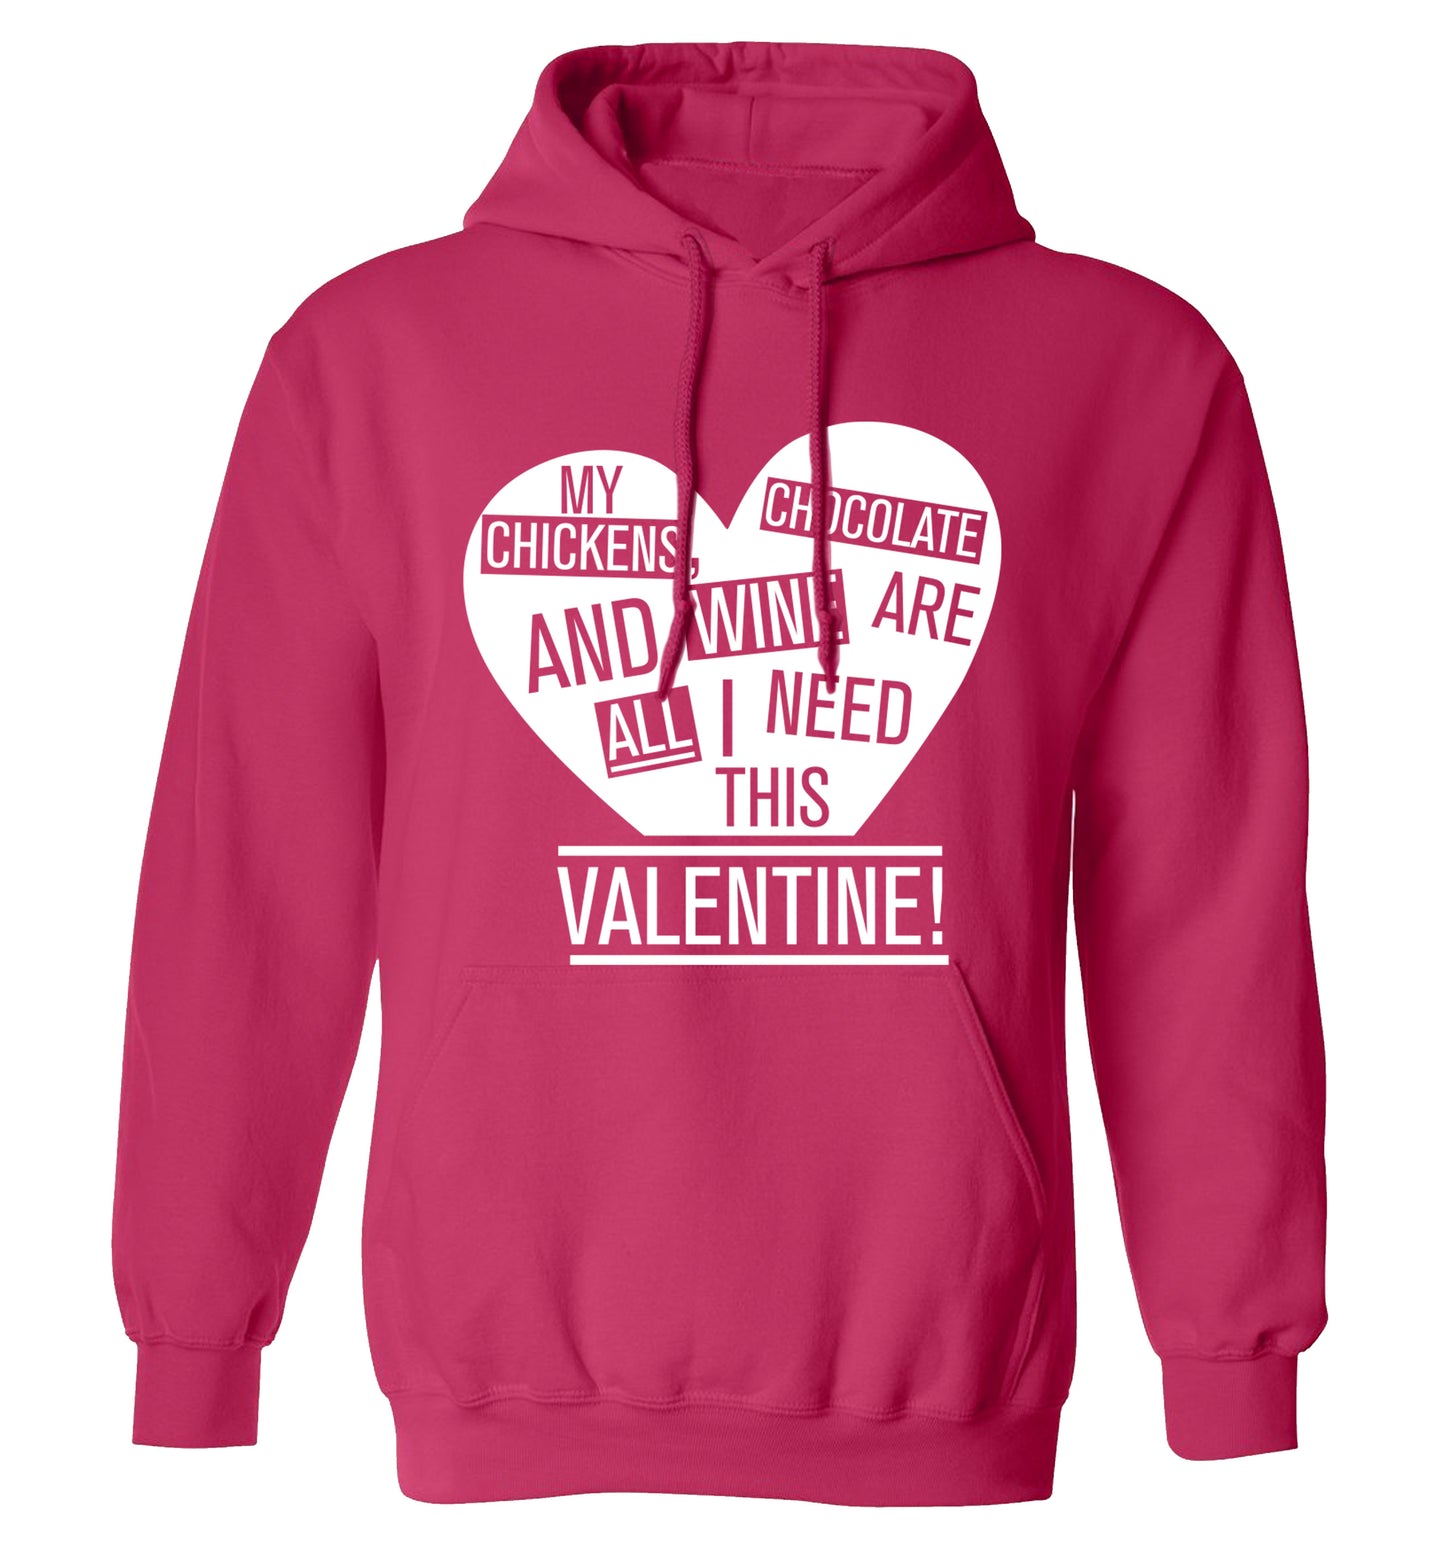 My chickens, chocolate and wine are all I need this valentine! adults unisex pink hoodie 2XL